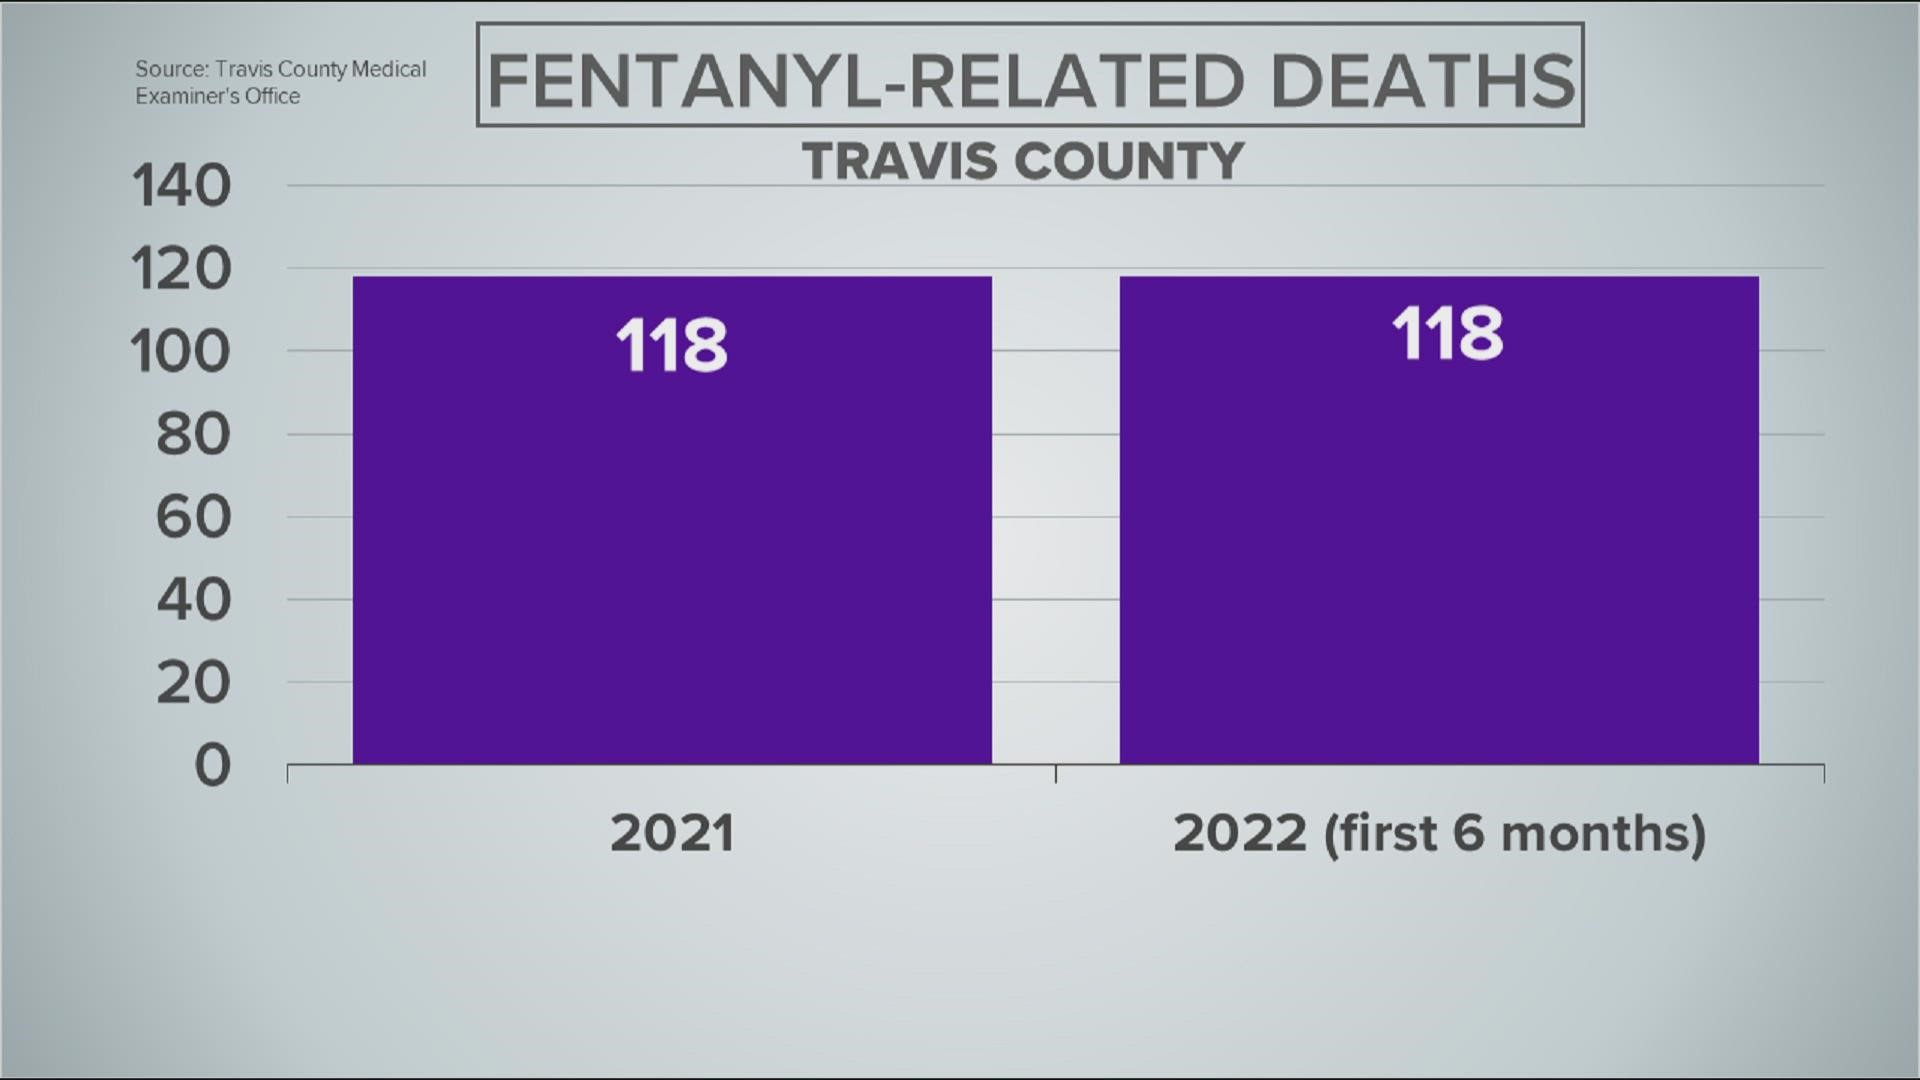 Travis County health officials expect fentanyl overdoses will double this year compared to 2021.